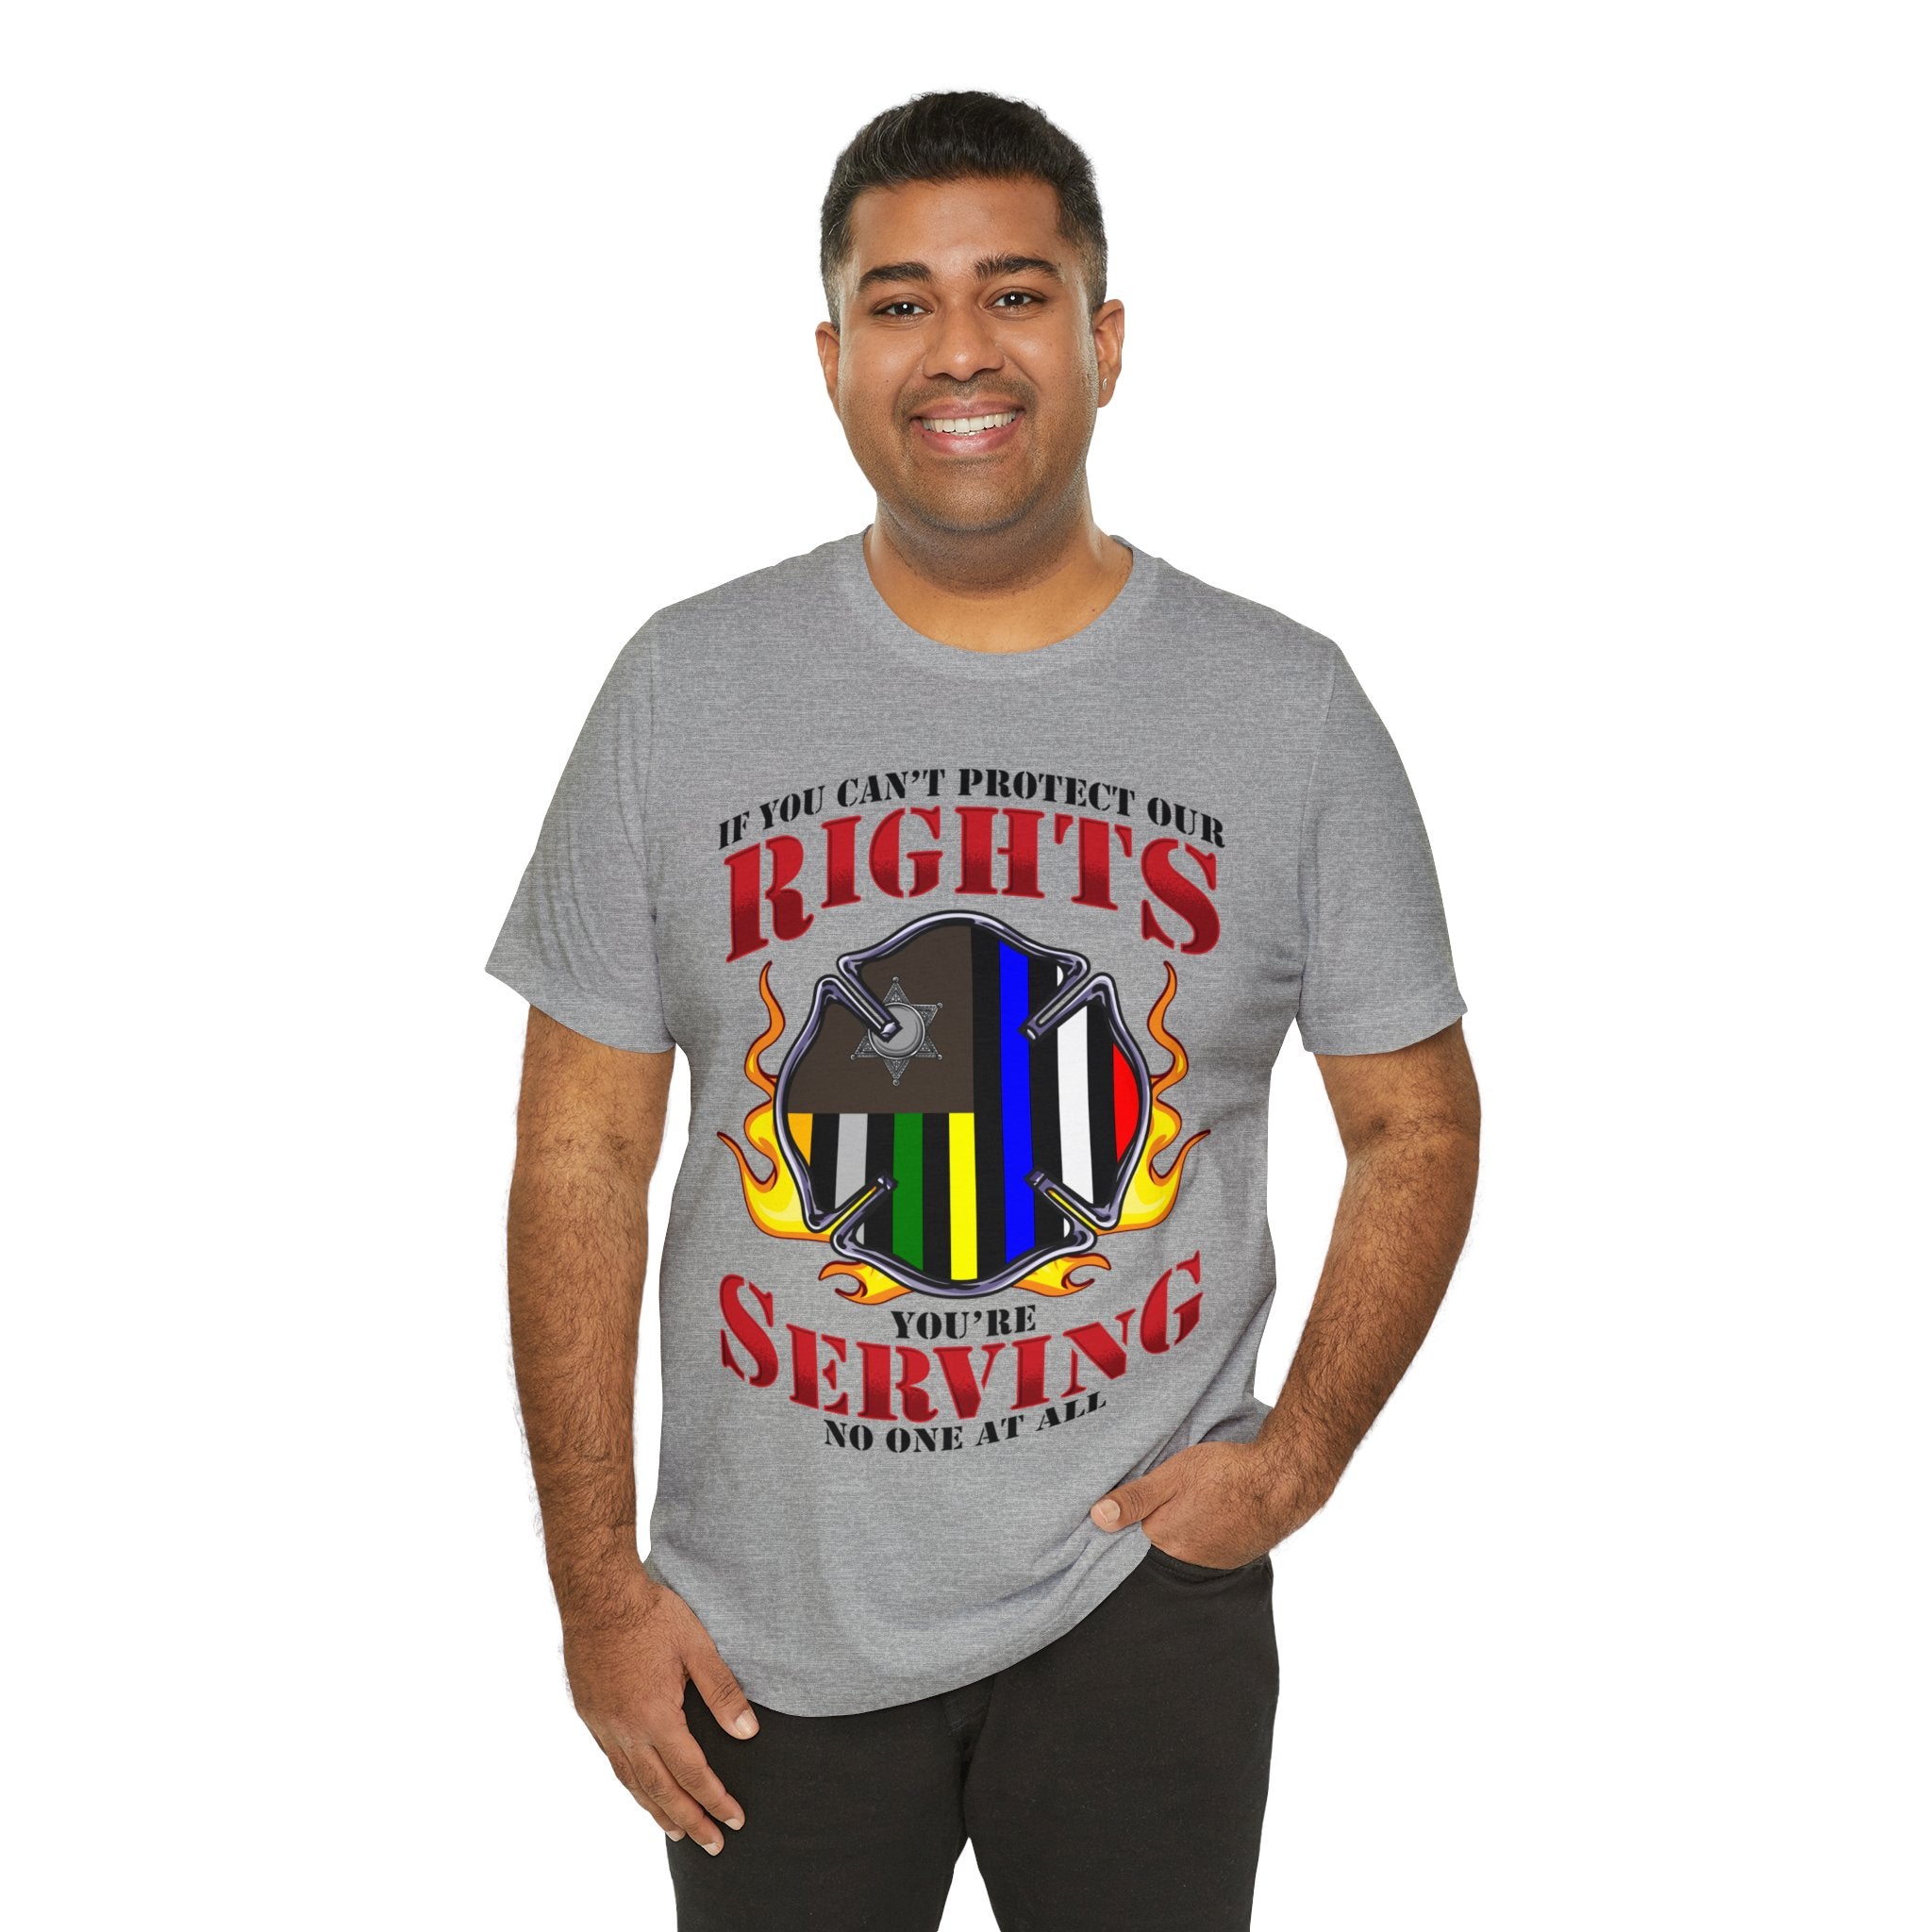 Thin Firefighter Line Tee - Rights/Serving